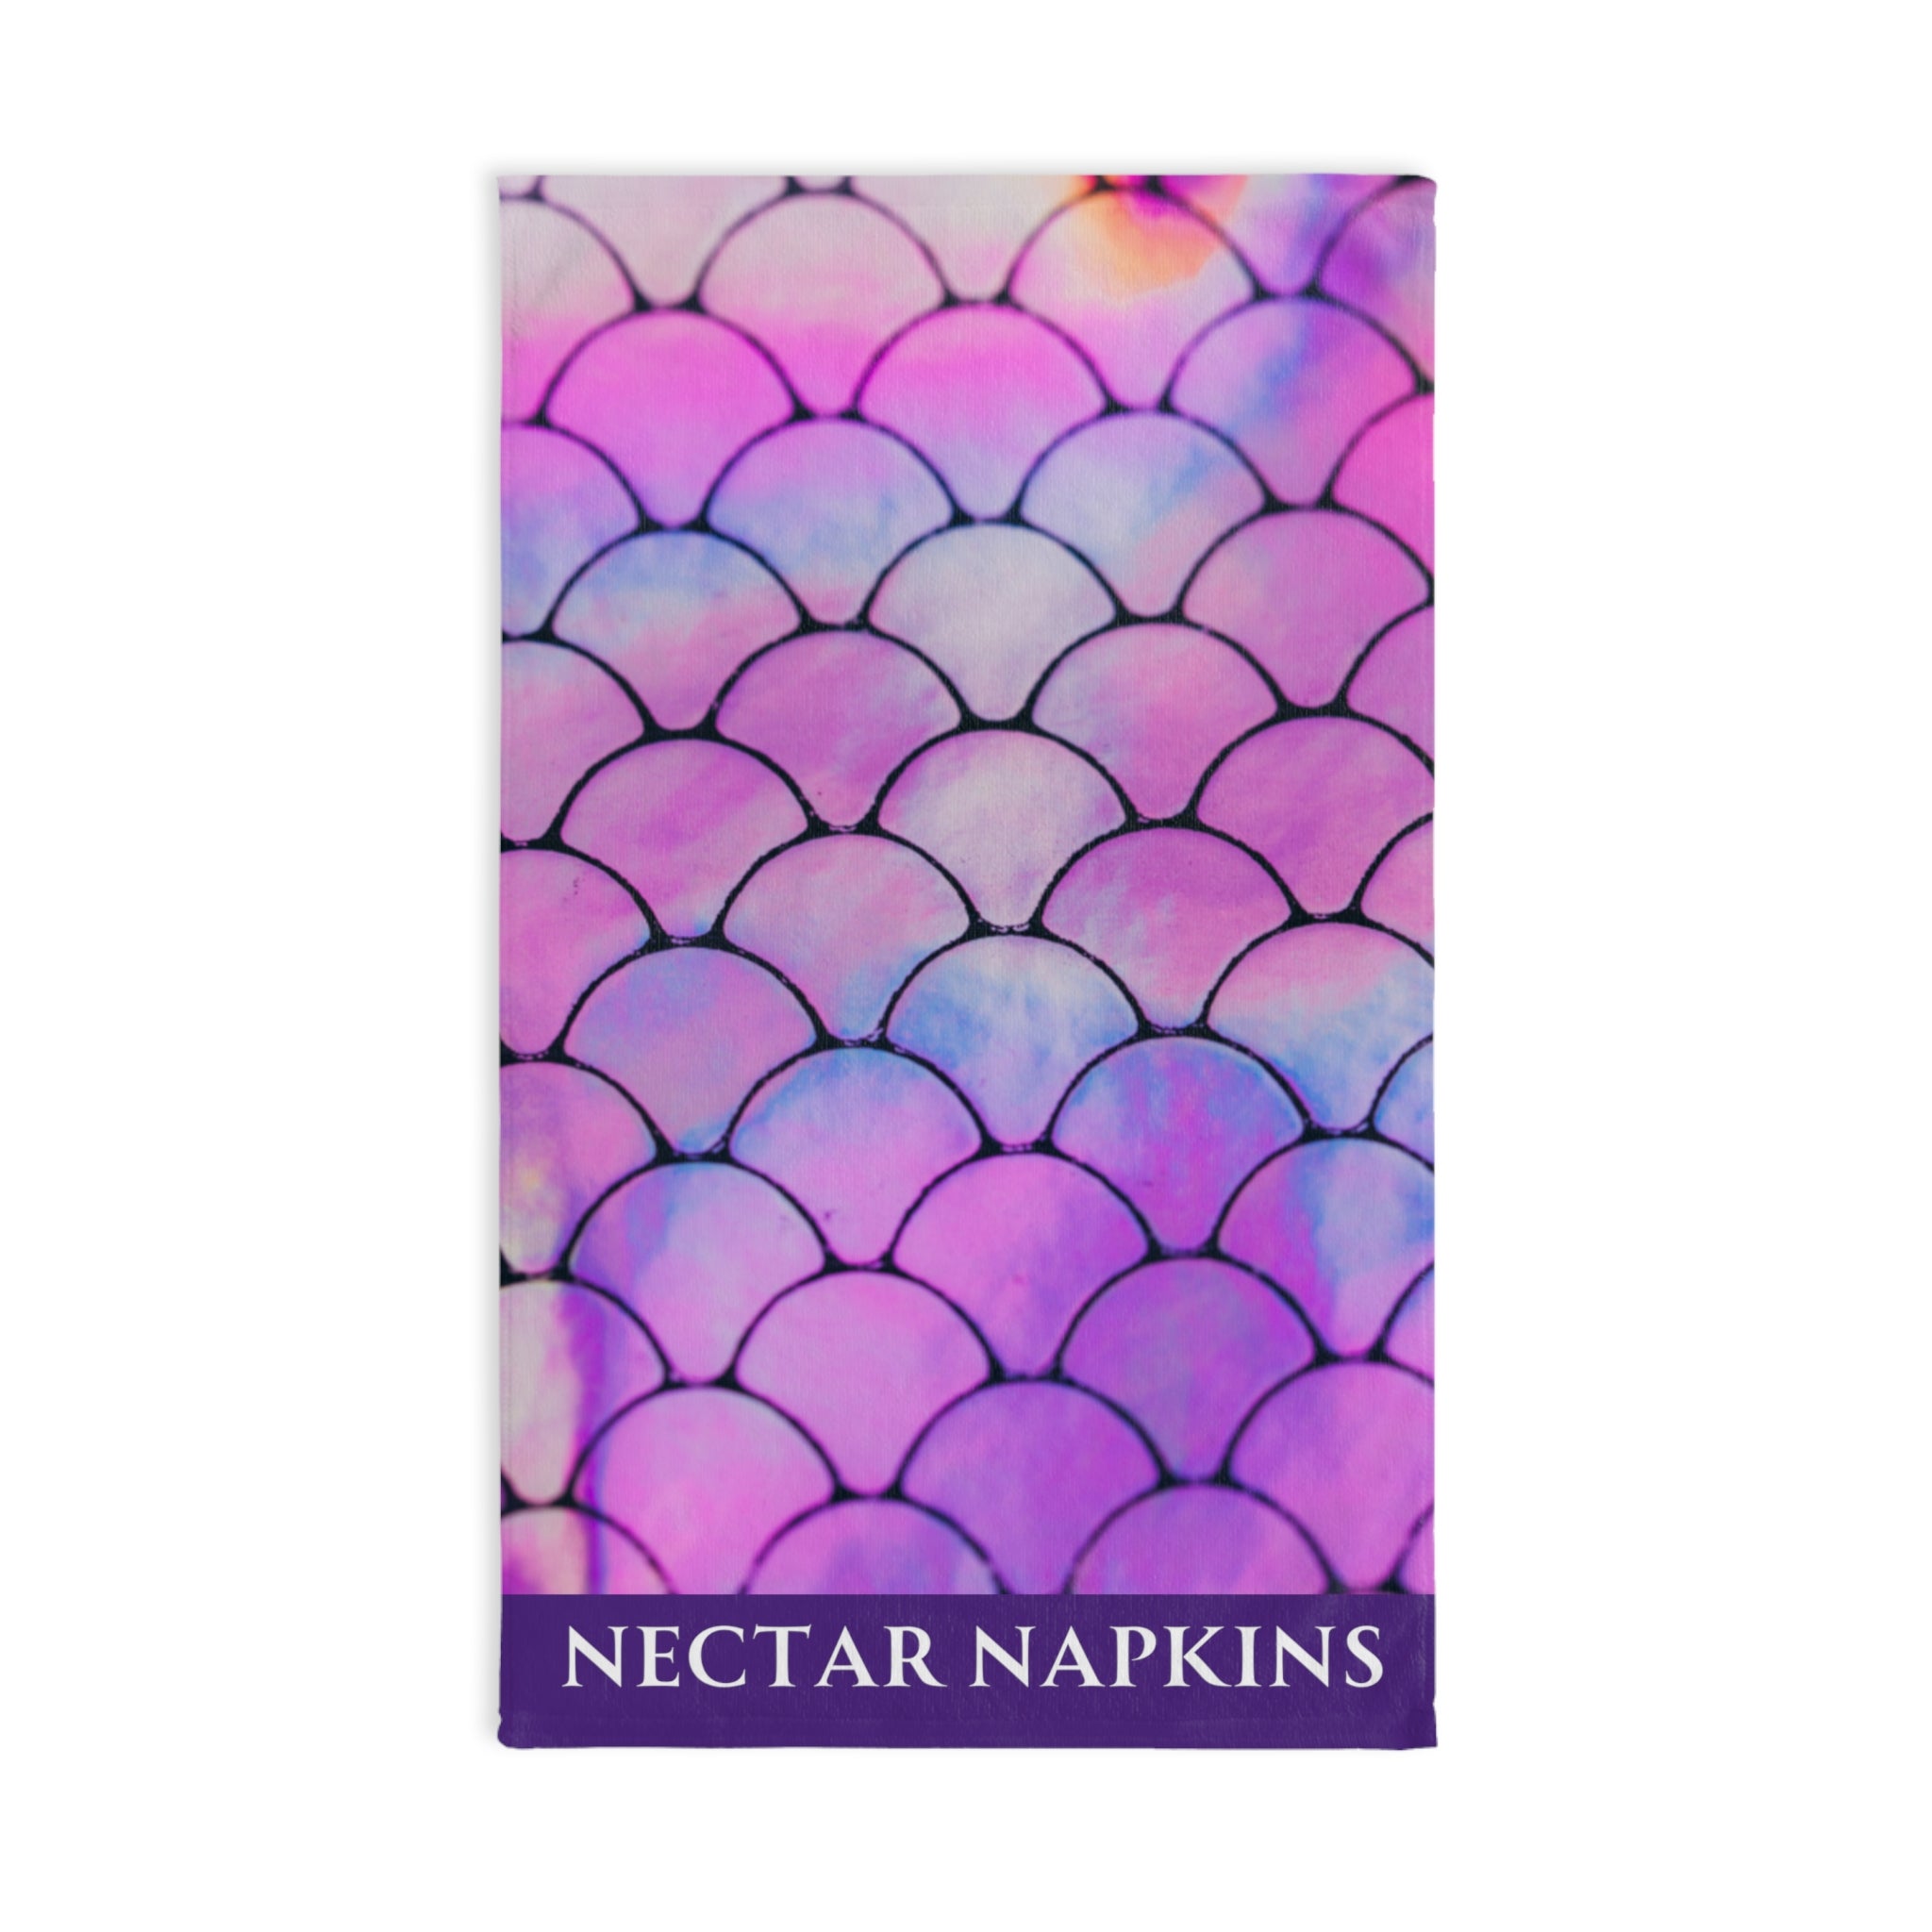 Mermaid Tail Purple Purple | Funny Gifts for Men - Gifts for Him - Birthday Gifts for Men, Him, Husband, Boyfriend, New Couple Gifts, Fathers & Valentines Day Gifts, Christmas Gifts NECTAR NAPKINS